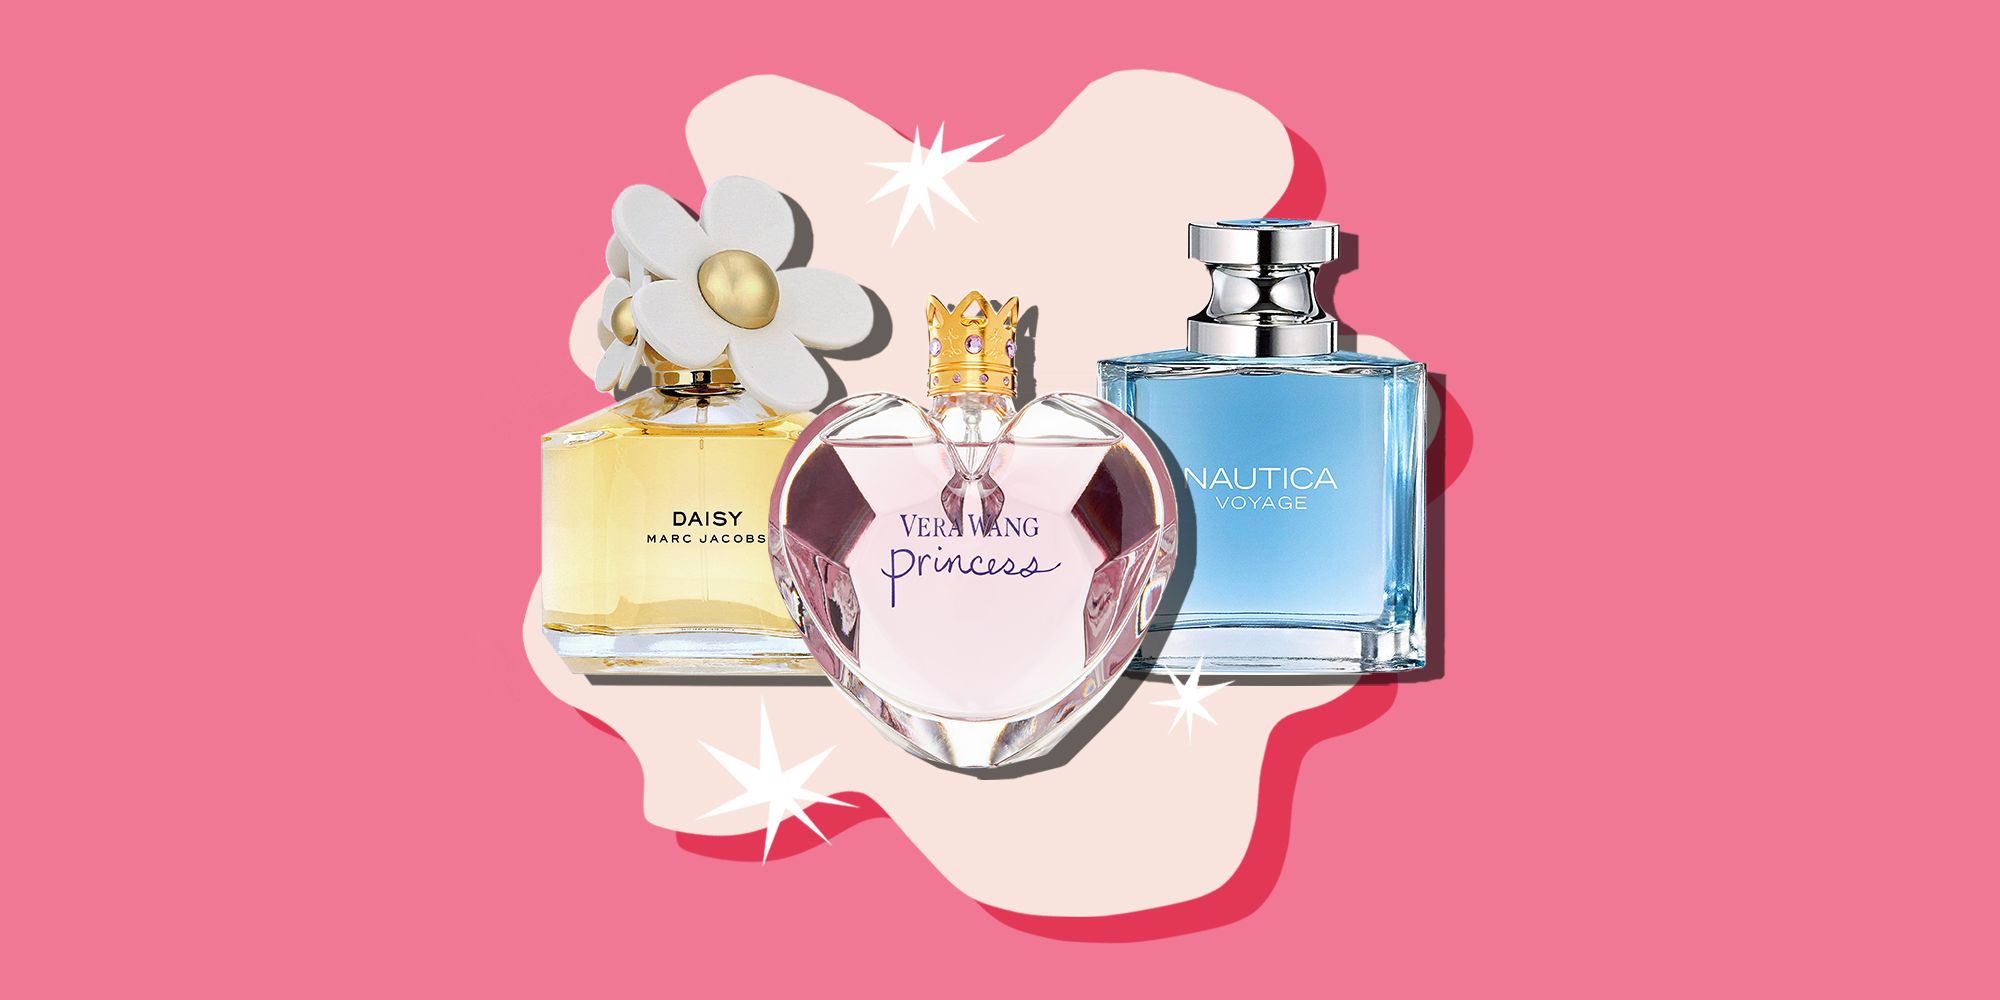 11 Men's Colognes Women Love: The Best Fragrances To Attract Females 2023